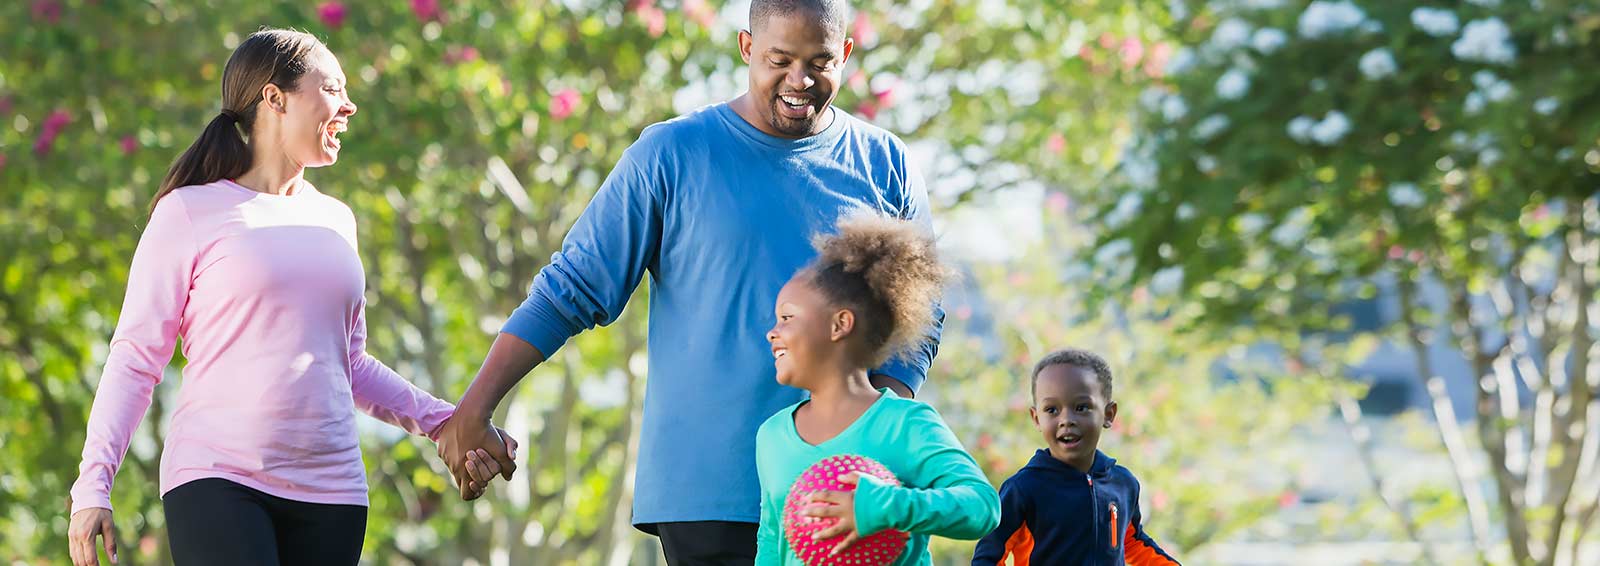 active family in the park avoiding prediabetic health conditions